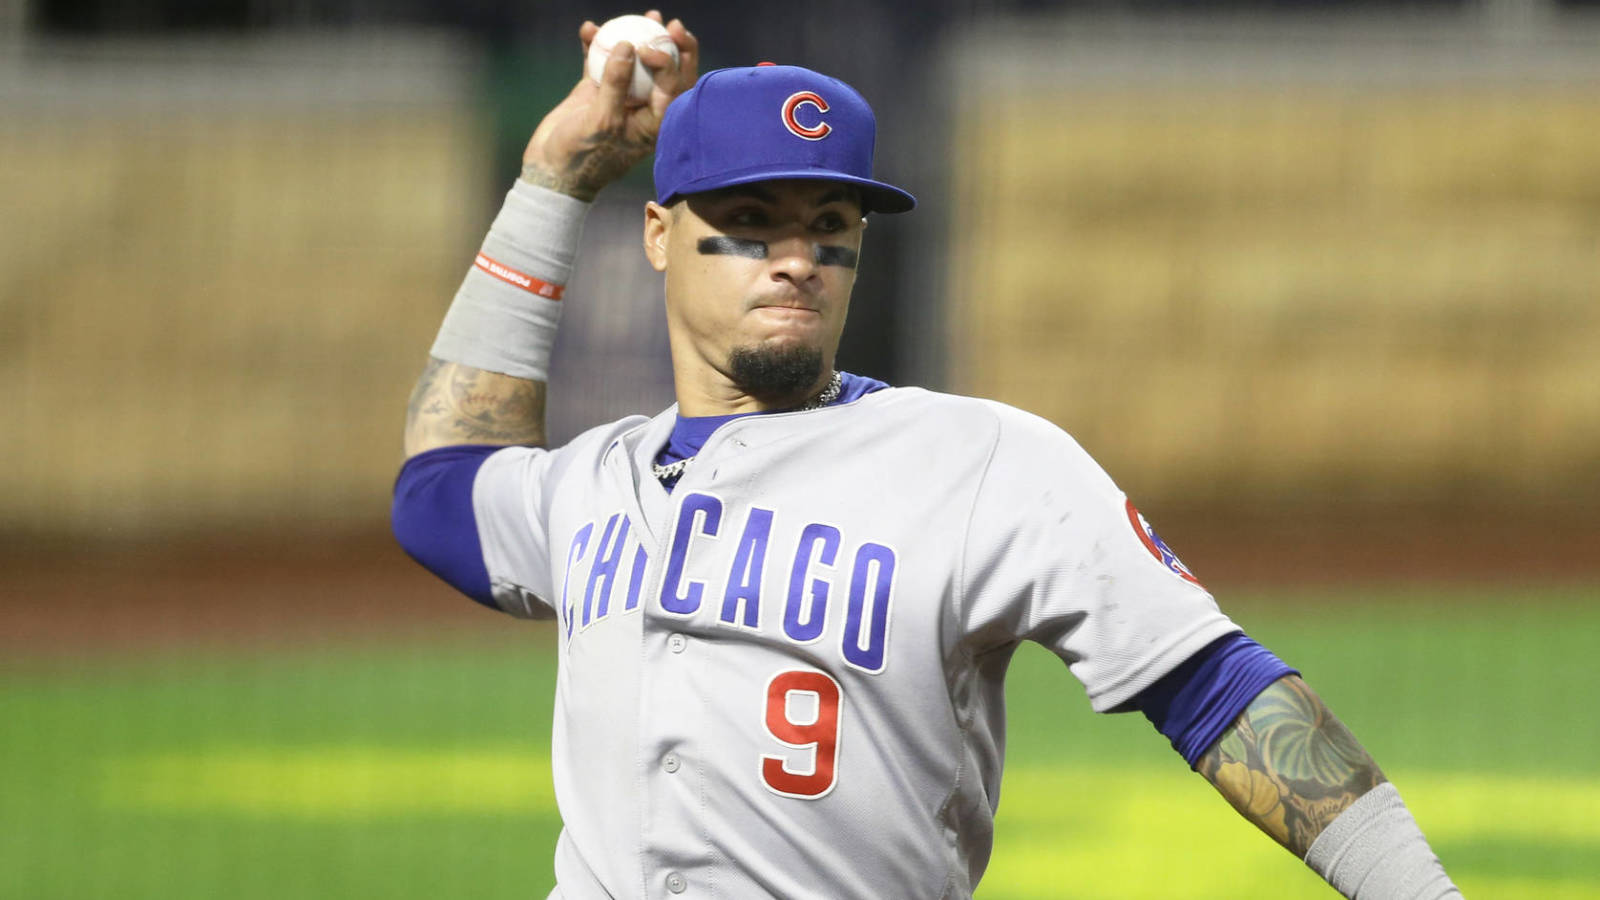 Cubs' Javier Baez honored to wear No. 21 on Roberto Clemente Day